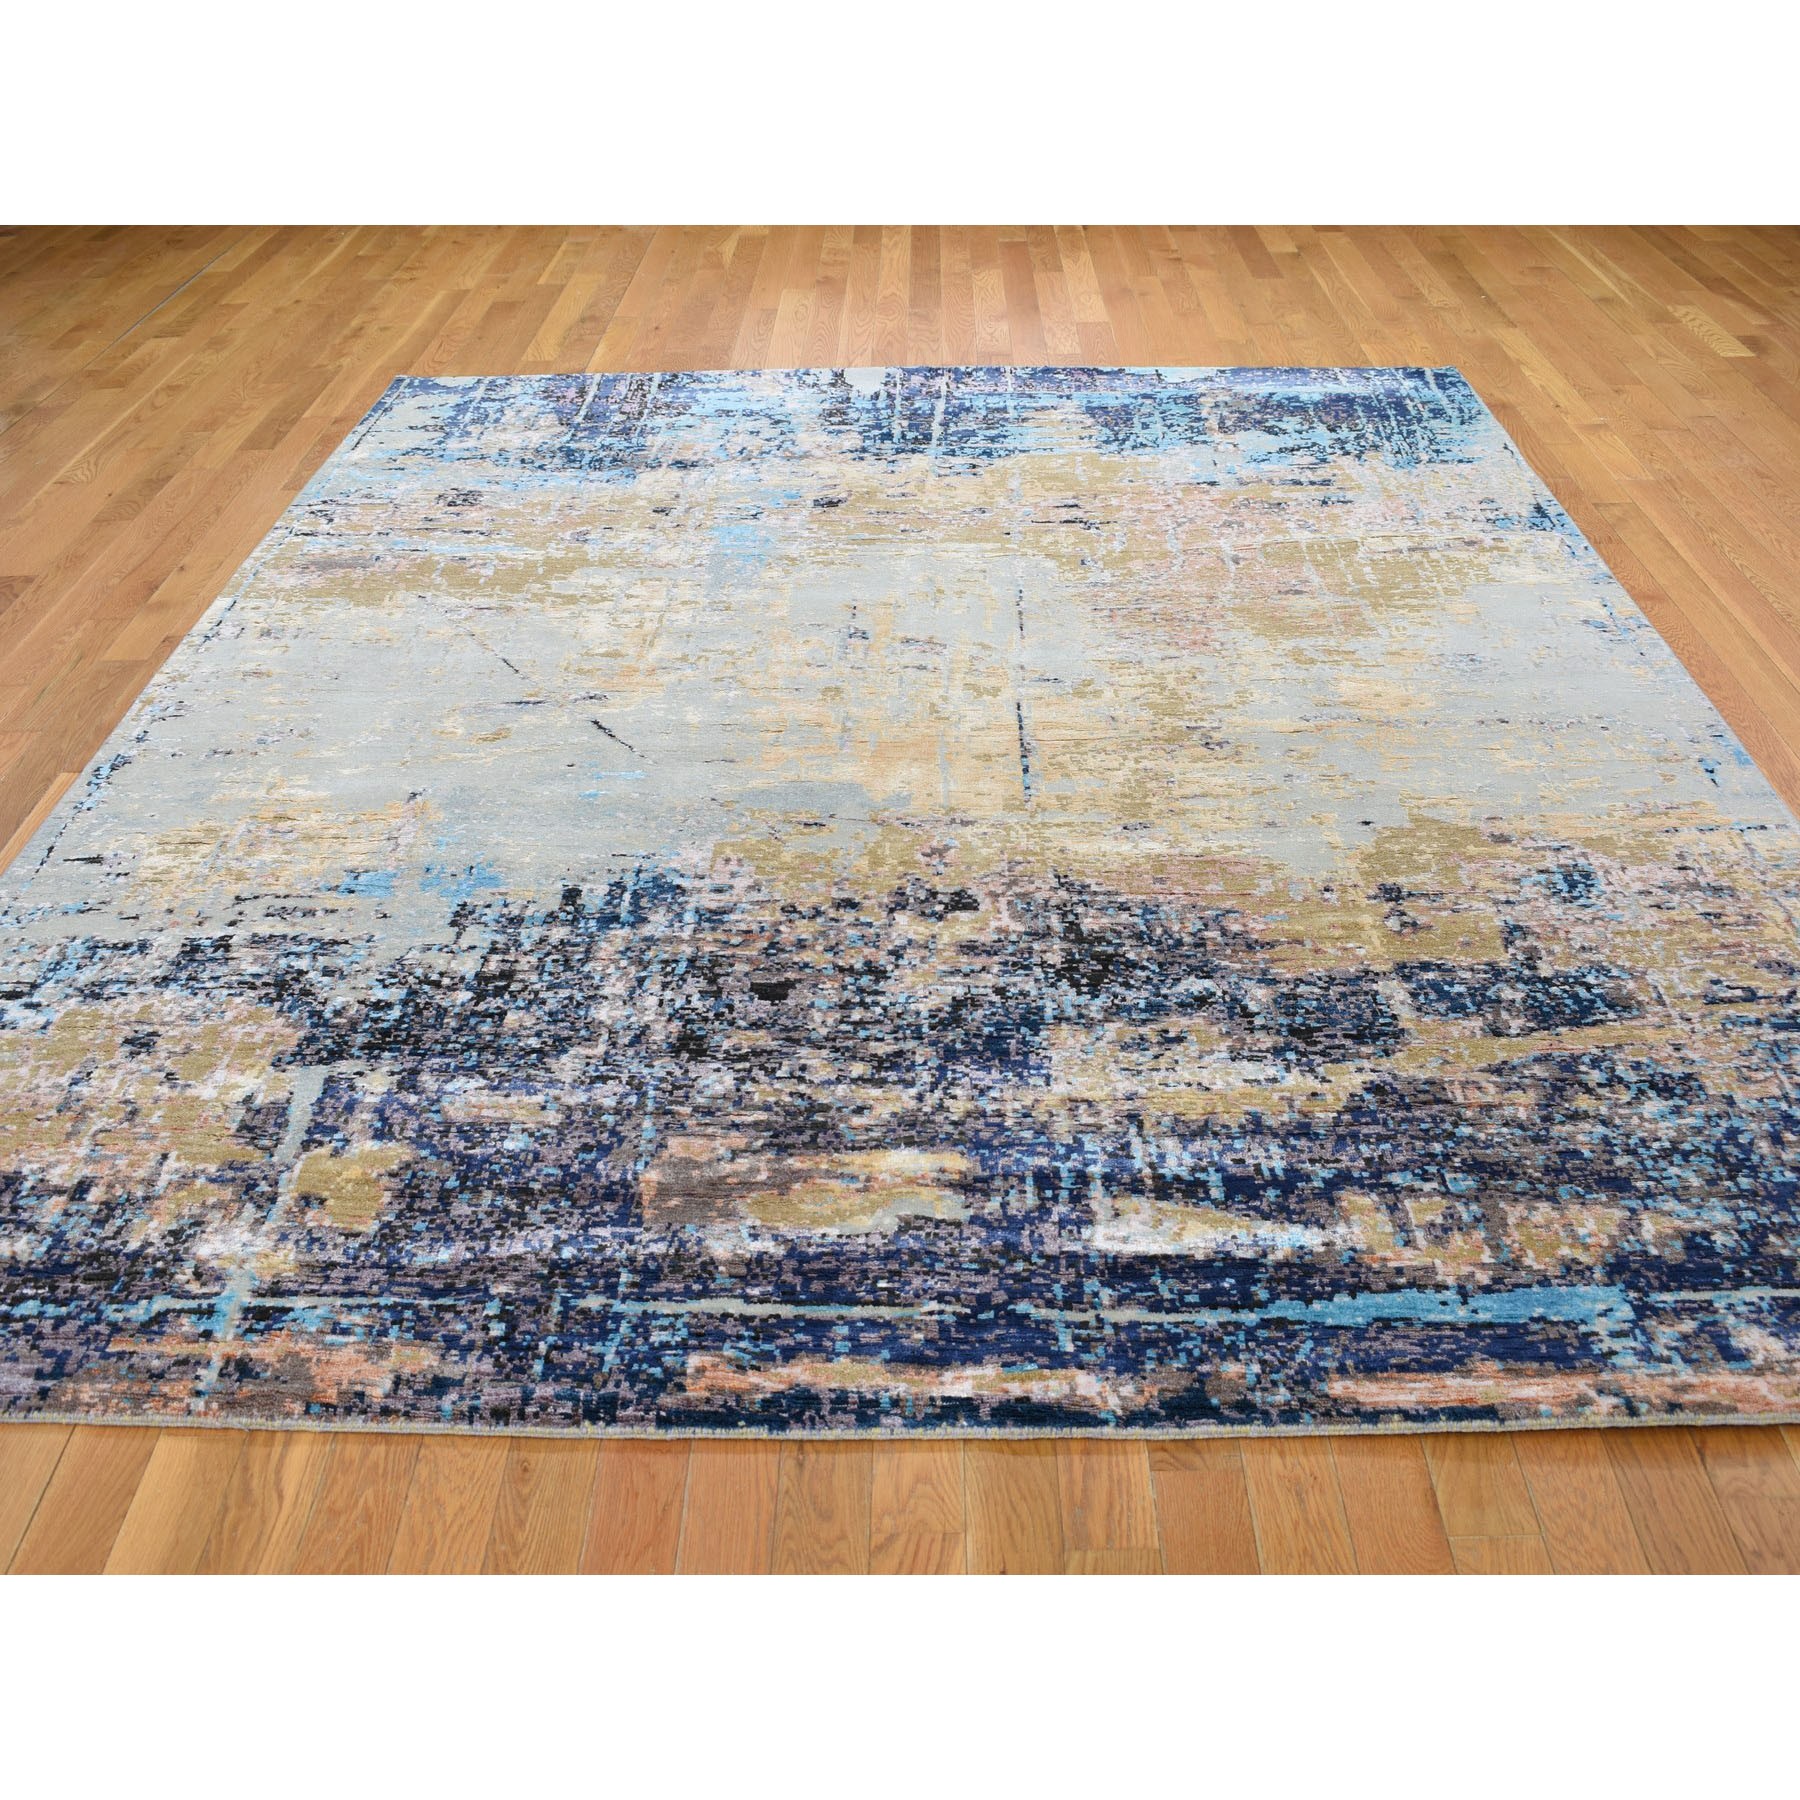 8-1 x10- Wool and Silk Abstract Design Hand Knotted Oriental Rug 